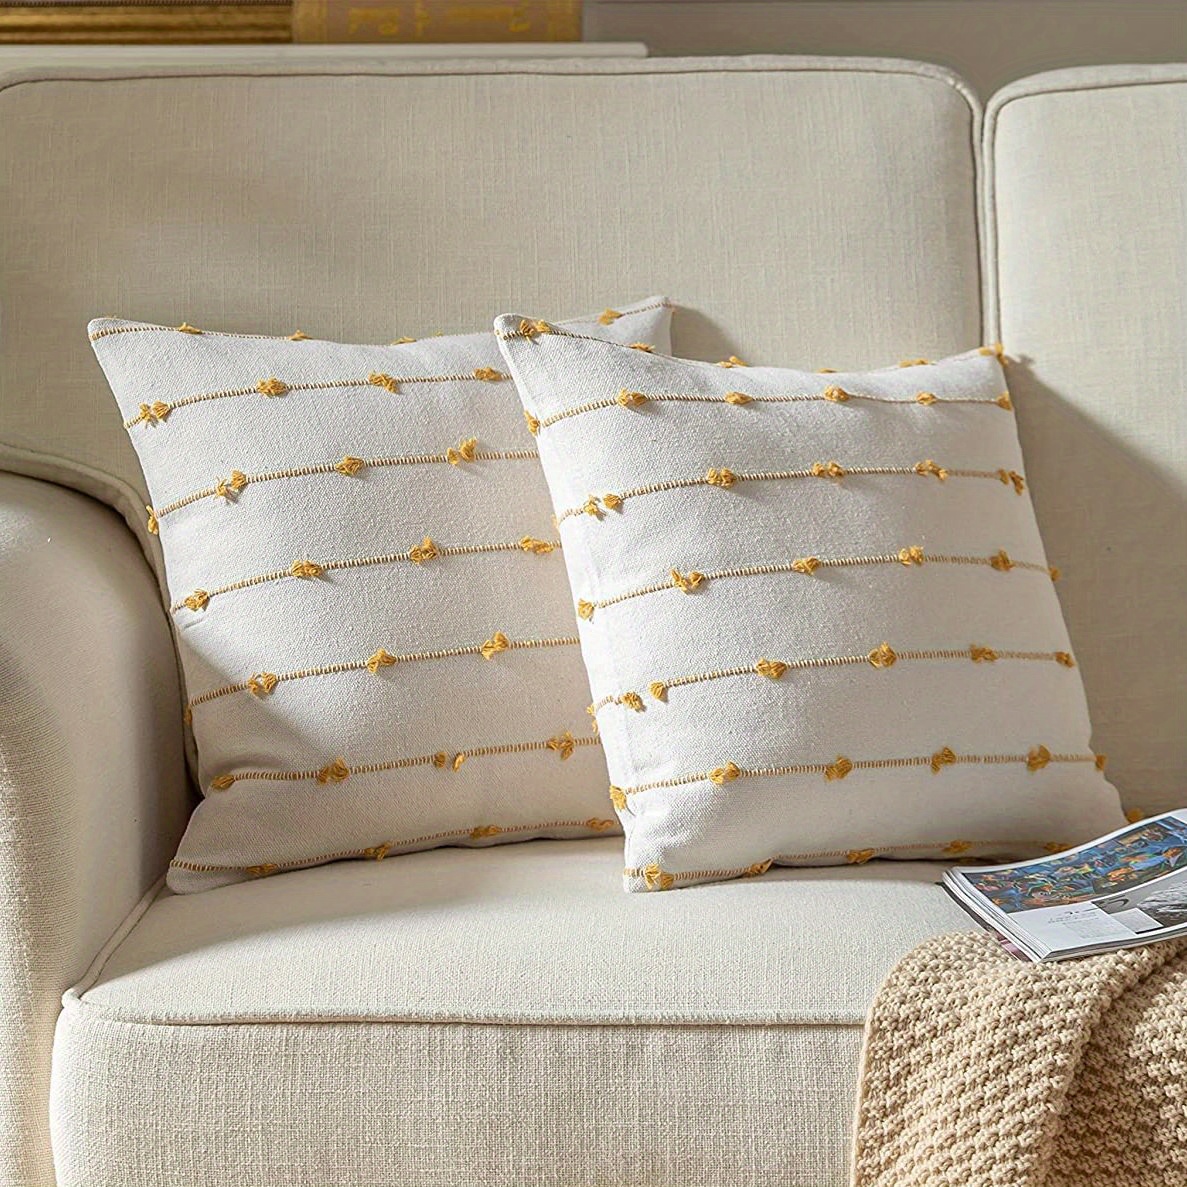 Yellow Embroidered Decorative Modern Square Throw Pillow Covers Embroidery Pillow  Cushion Cases for Couch Sofa Bedroom Living Room Car 20x20 inches 